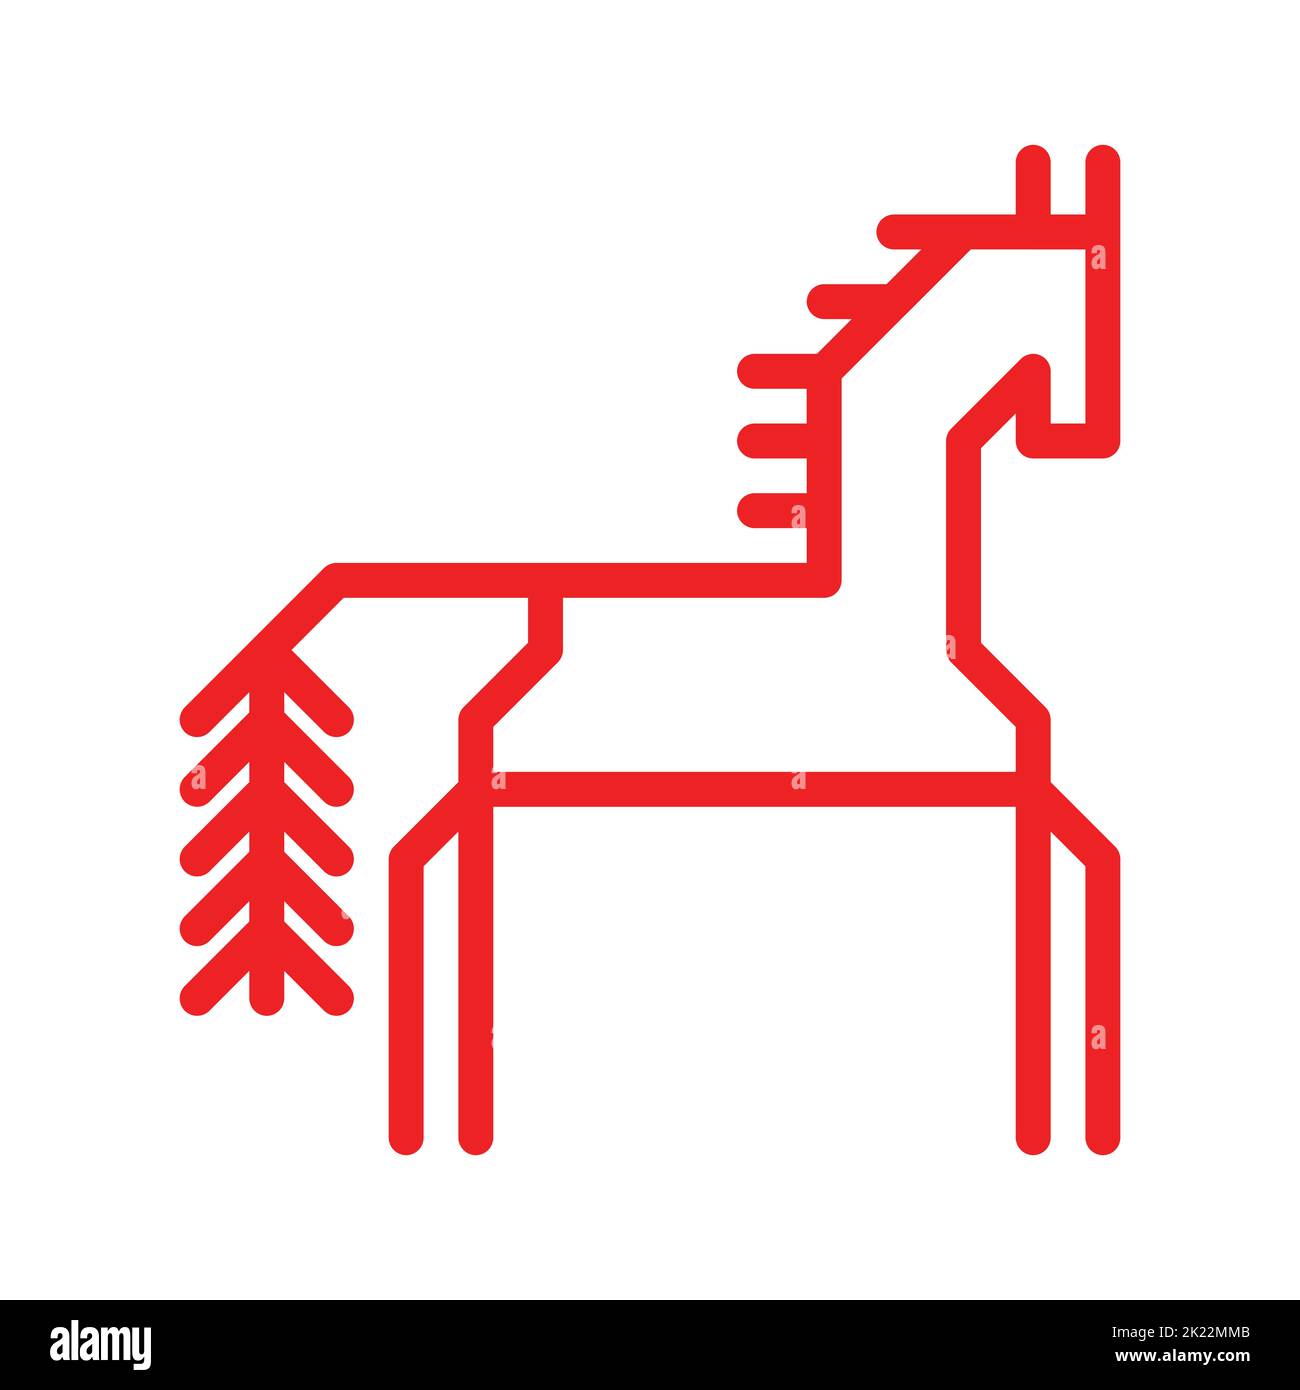 Vector ornamental concept has red simple symbol of horse. Outline icon of animal is traditional decorative element of Karelia and Finland peoples. Nat Stock Vector